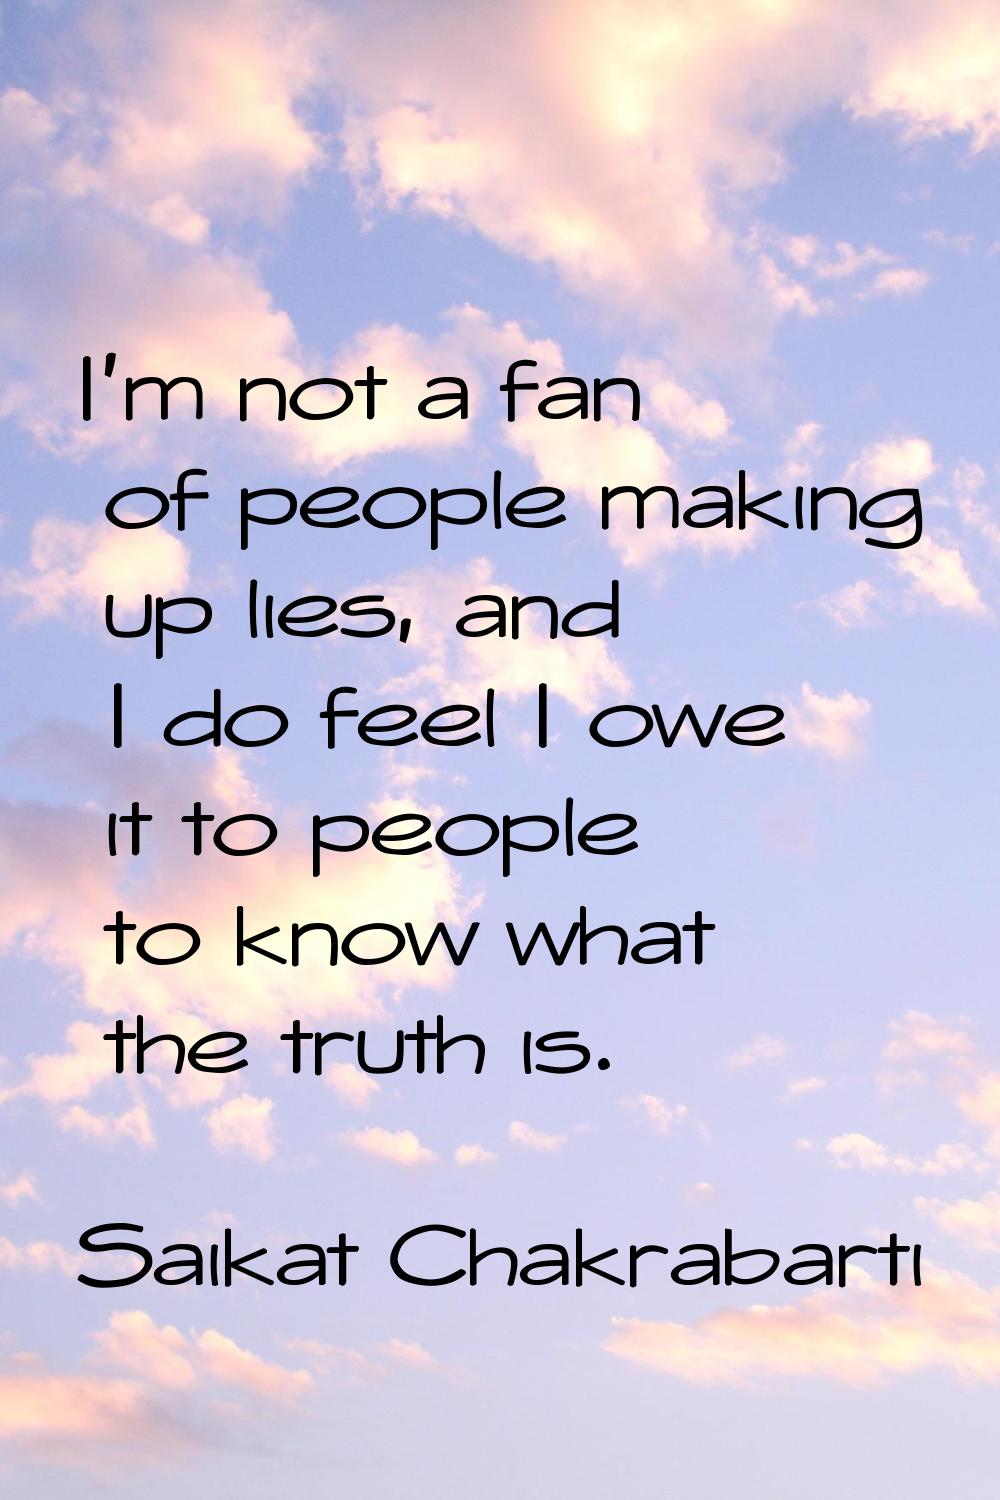 I'm not a fan of people making up lies, and I do feel I owe it to people to know what the truth is.